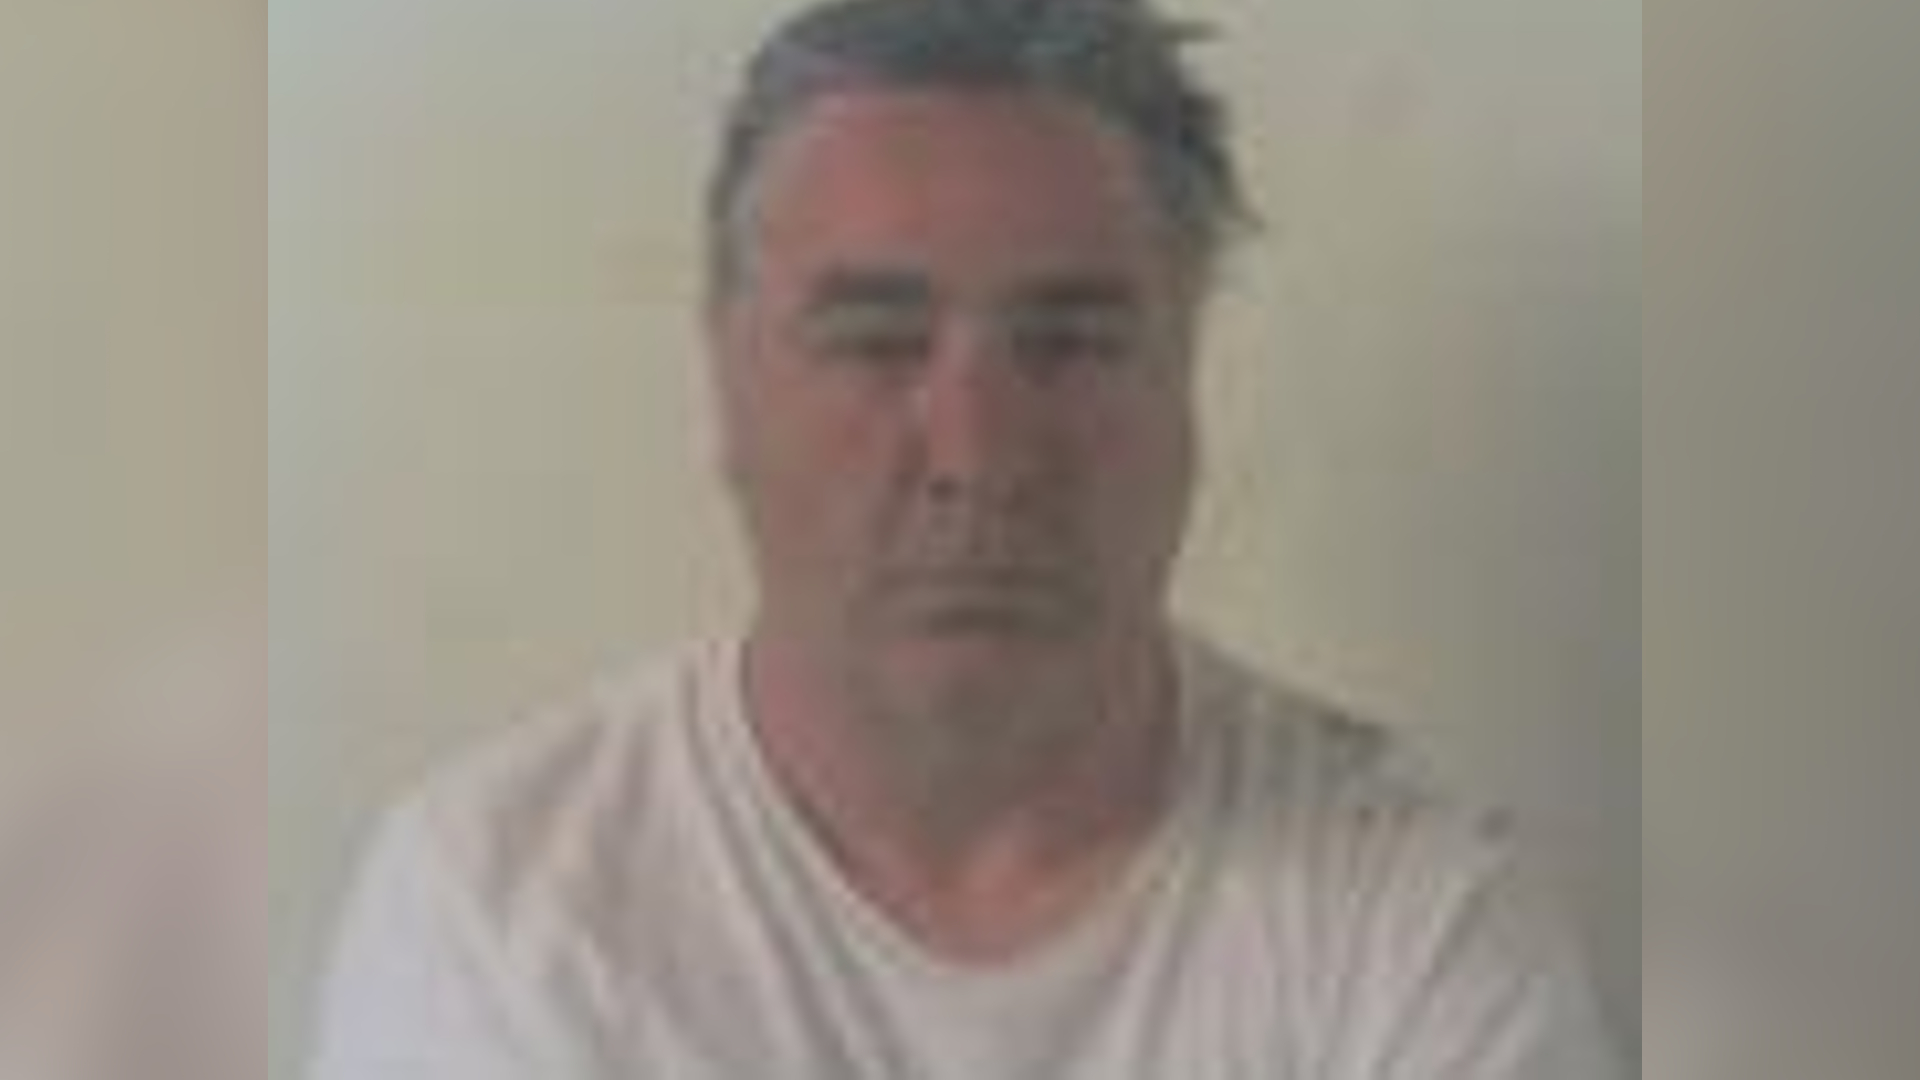 Michael Cavanagh Man jailed for 25 years for historical sex abuse pic image